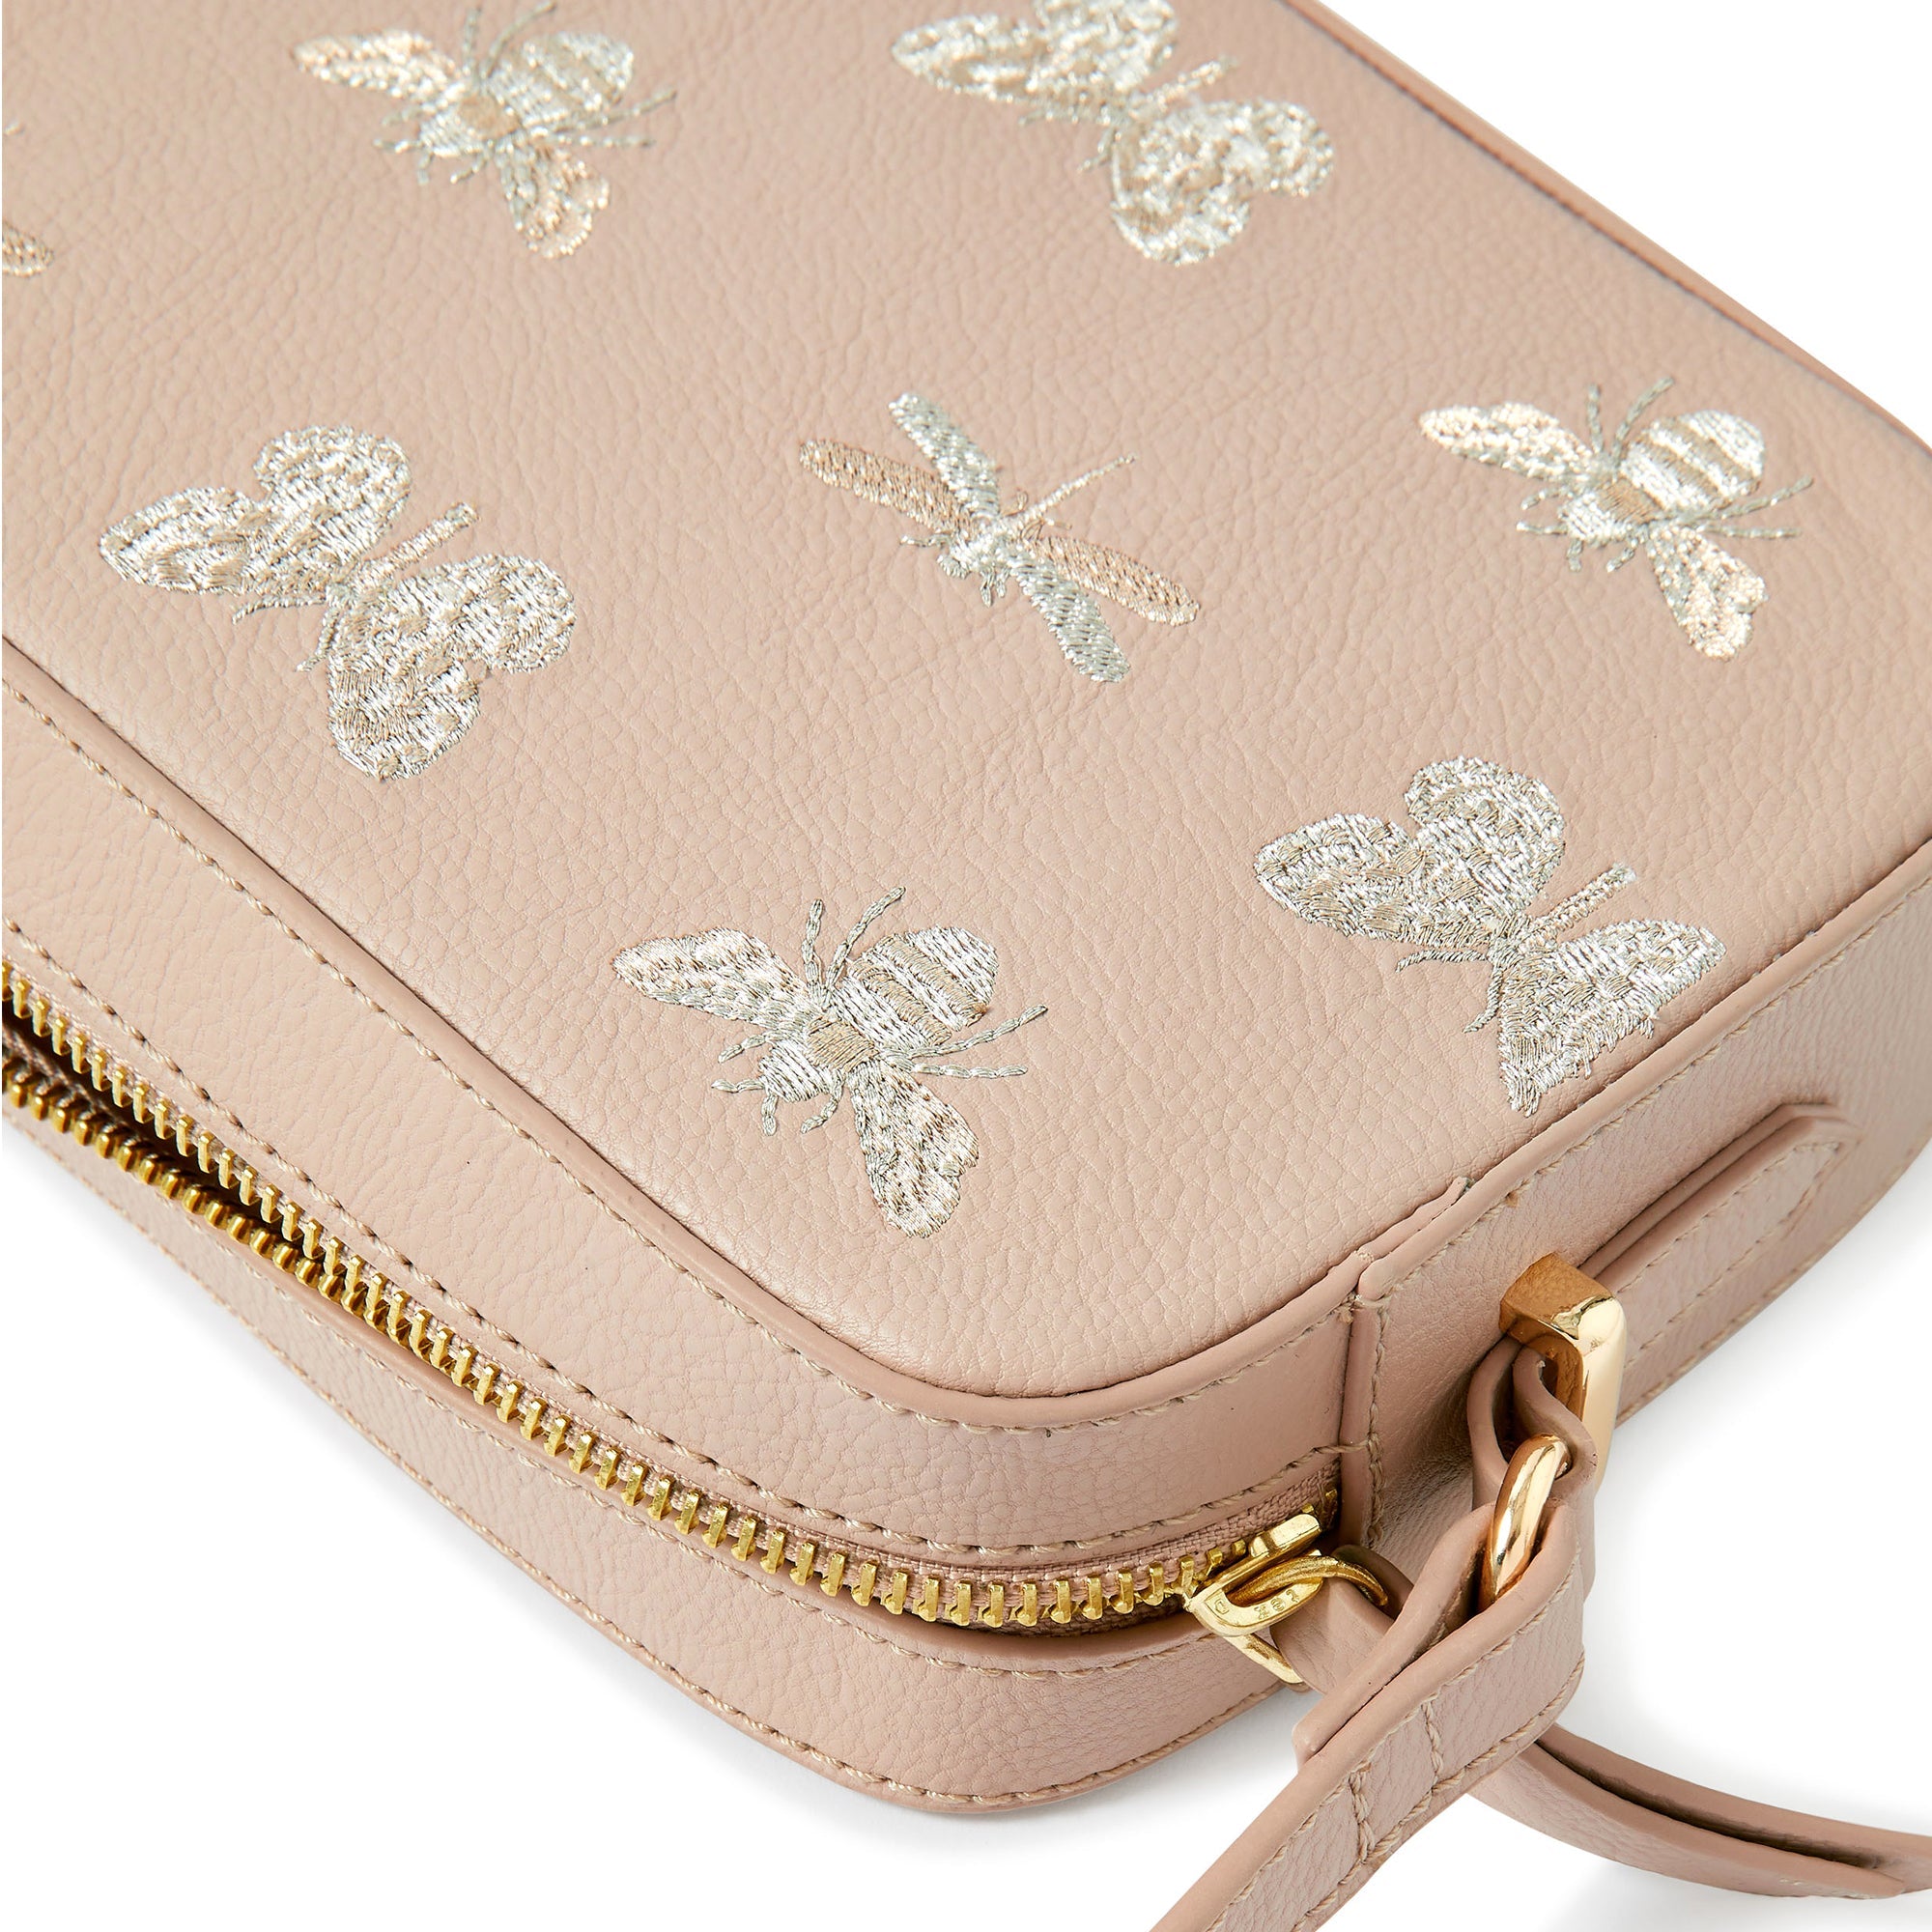 Accessorize London Women's Faux Leather Pink Embroidered Bugs Sling Bag